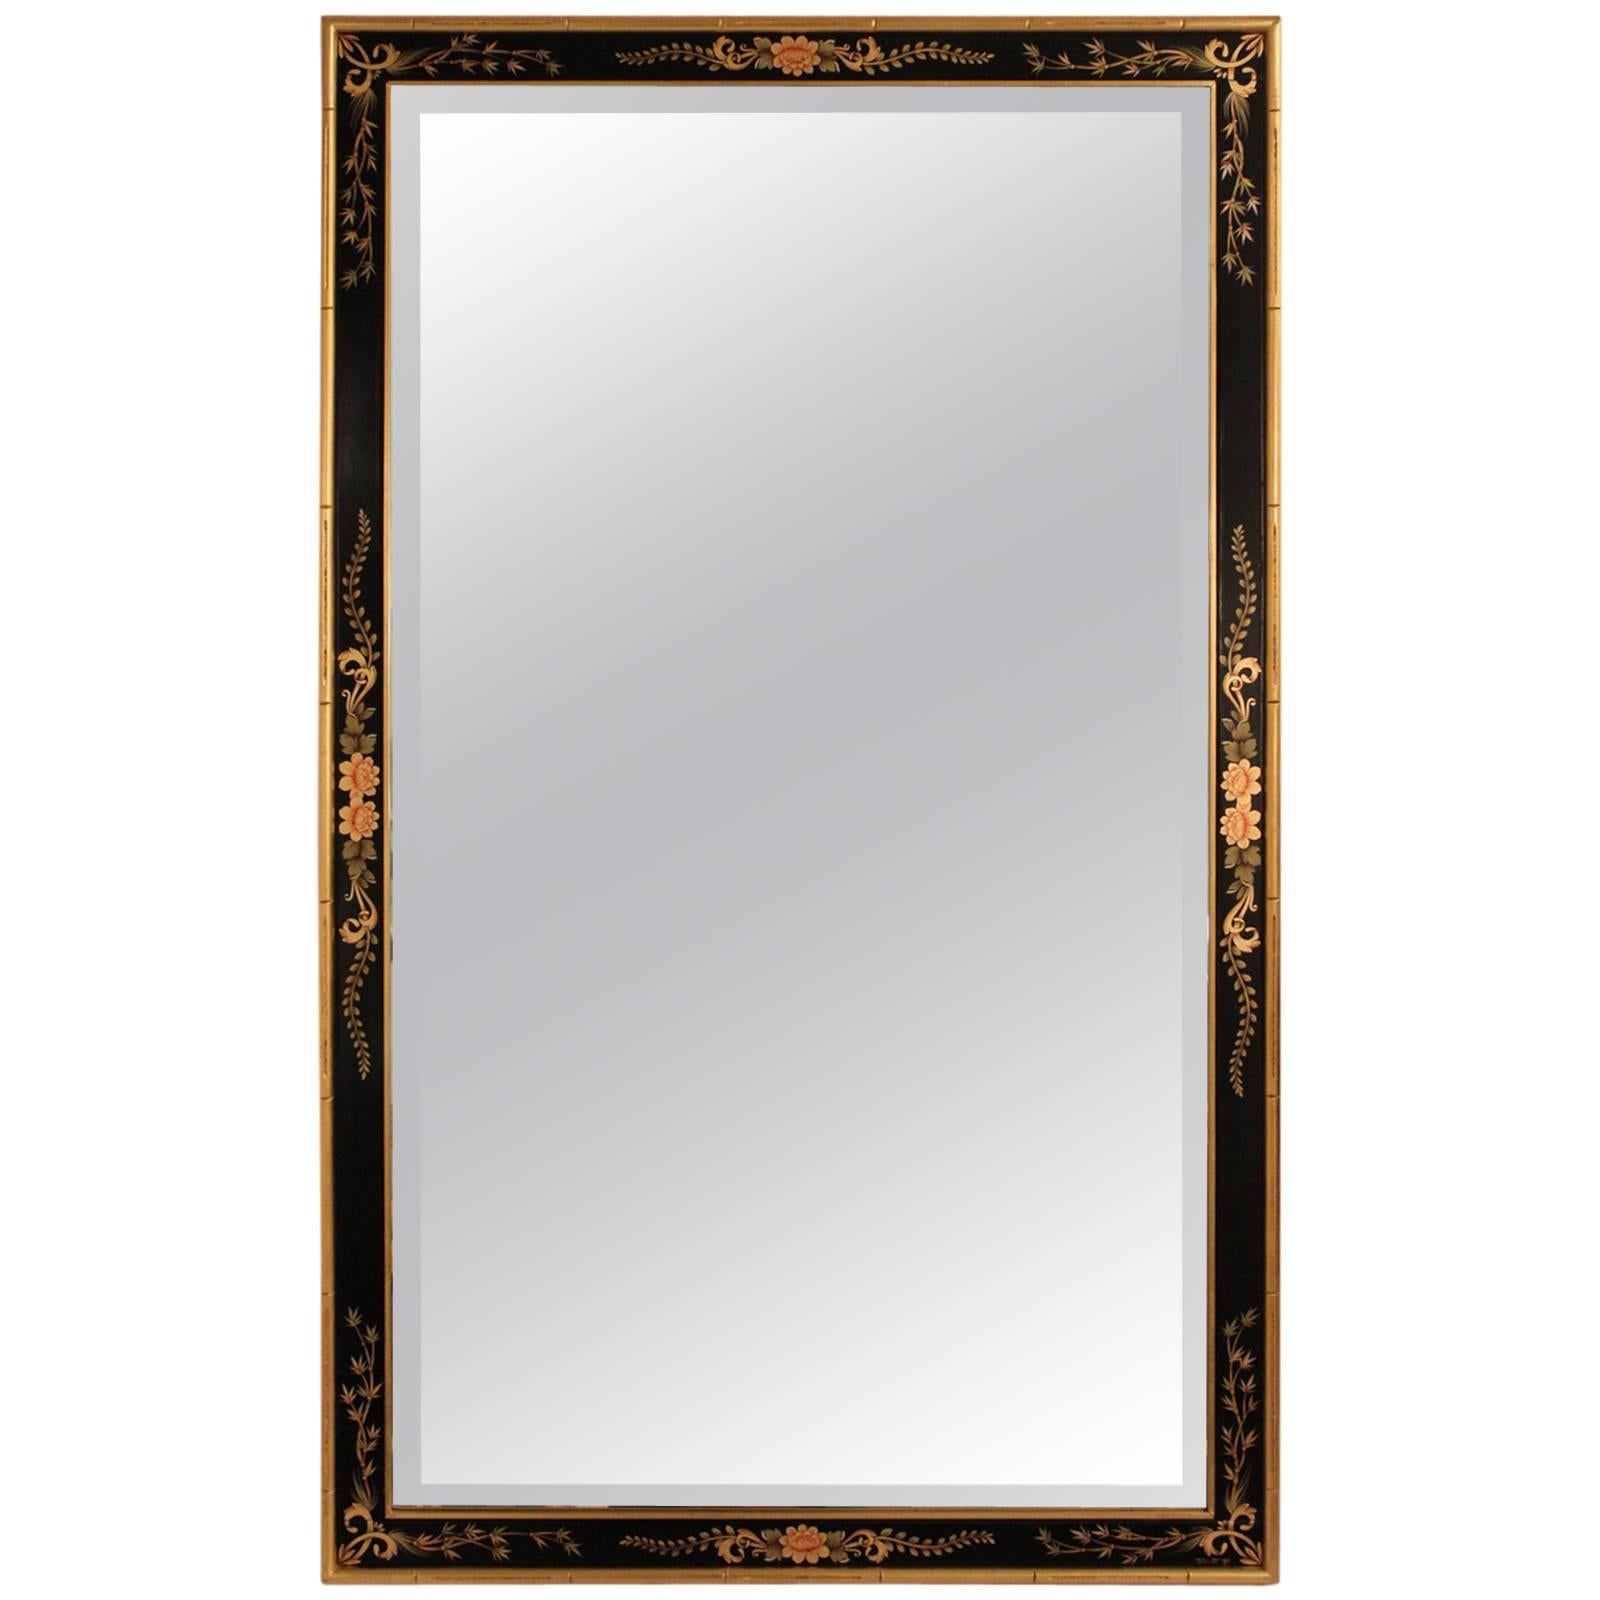 LaBarge Hand-Painted Beveled Wall Mirror